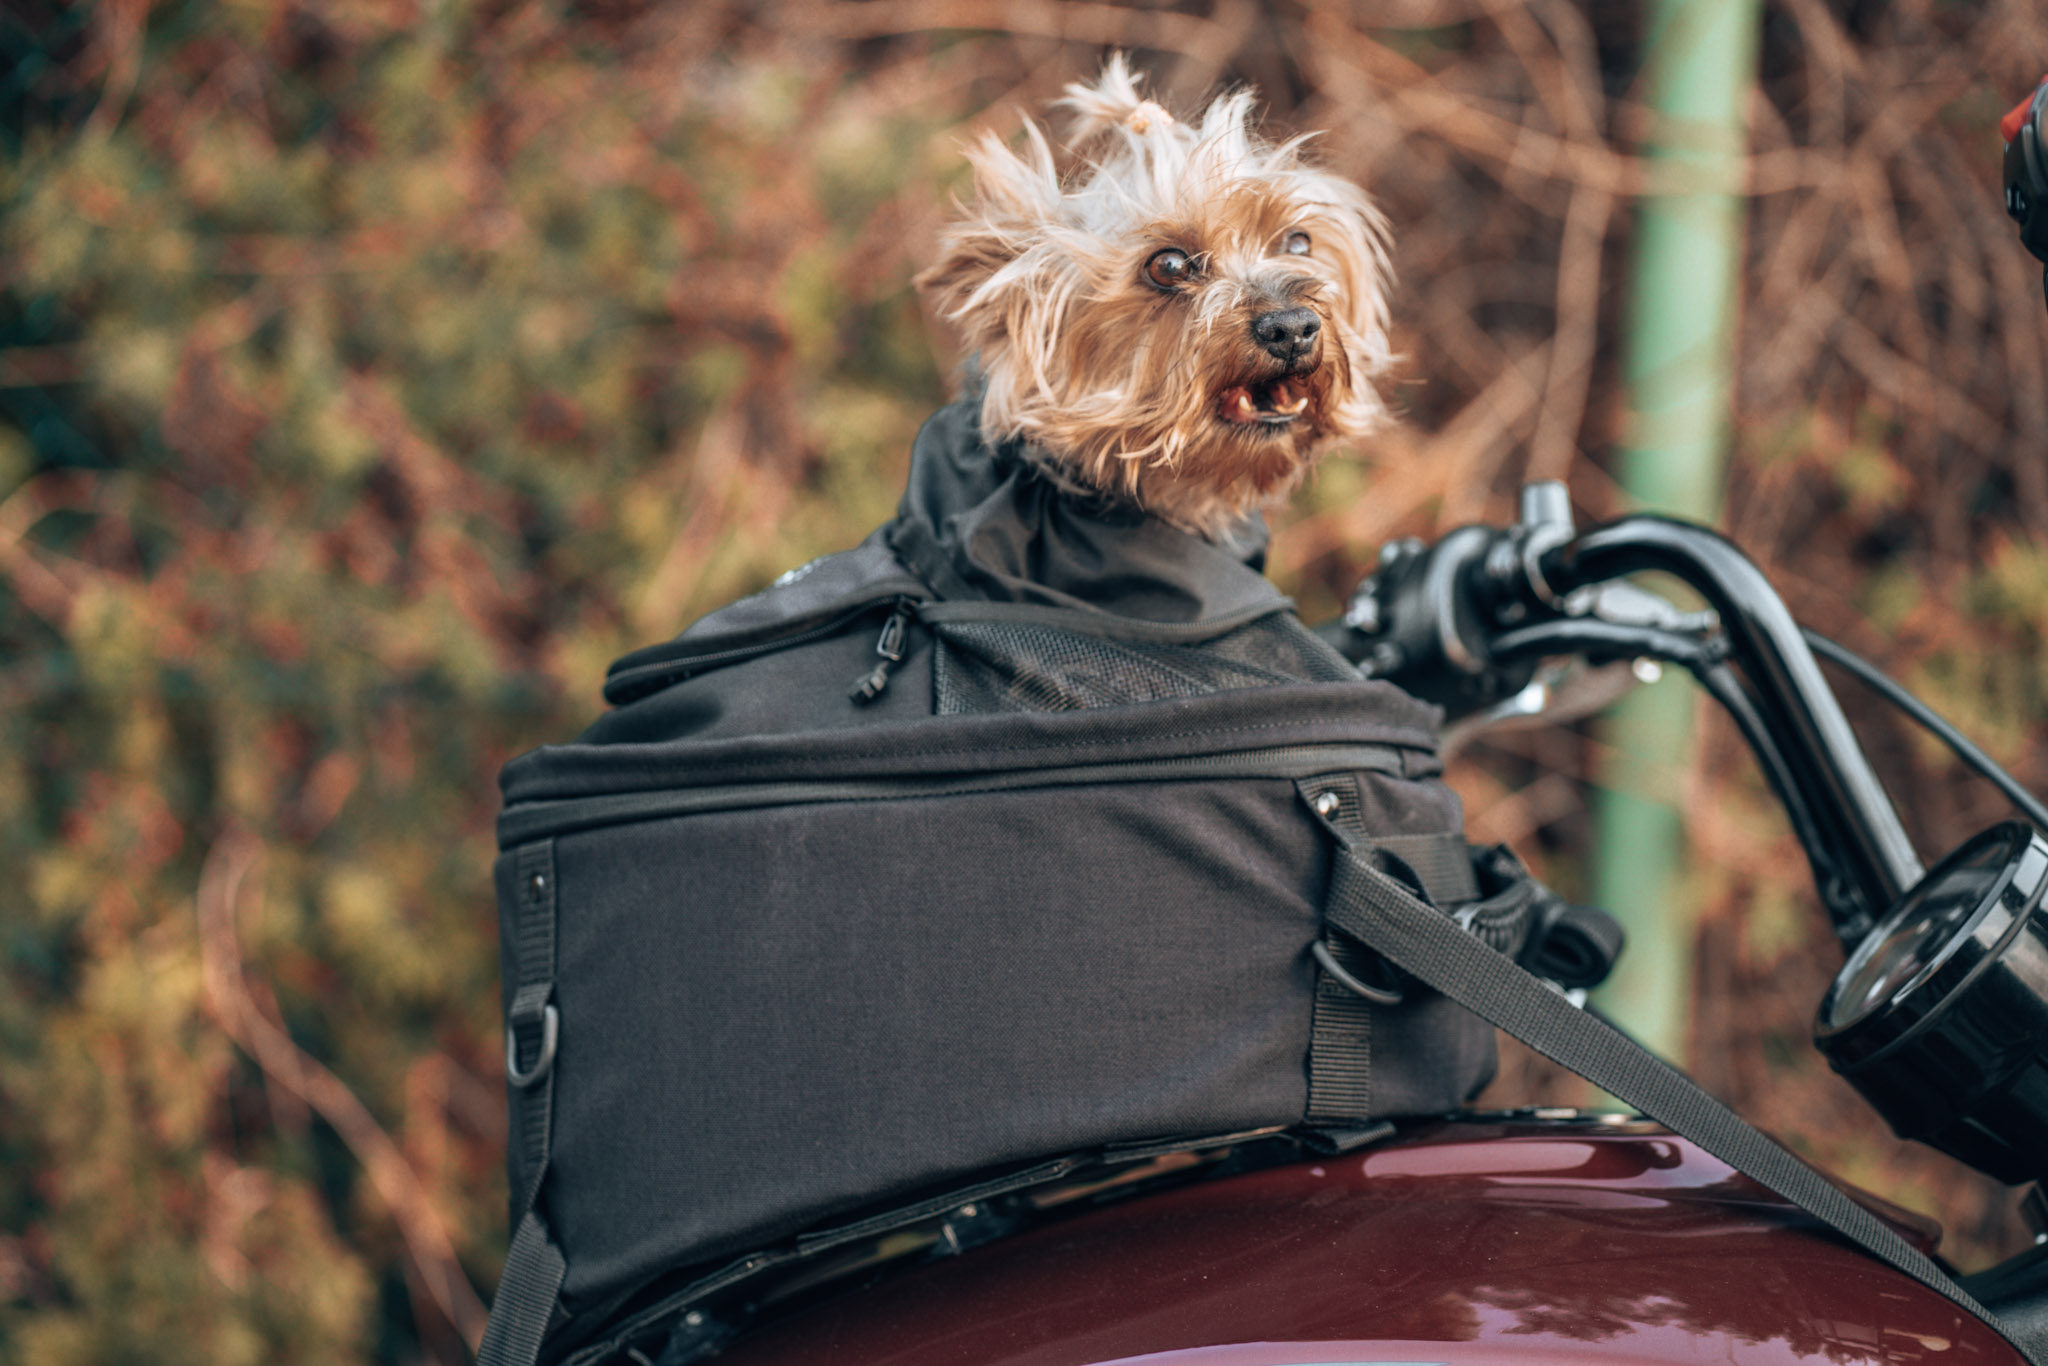 DeemeeD EXPEDITION HYBRID DOG CARRIER bag on front tank - driving motocycle with a dog on the front, 